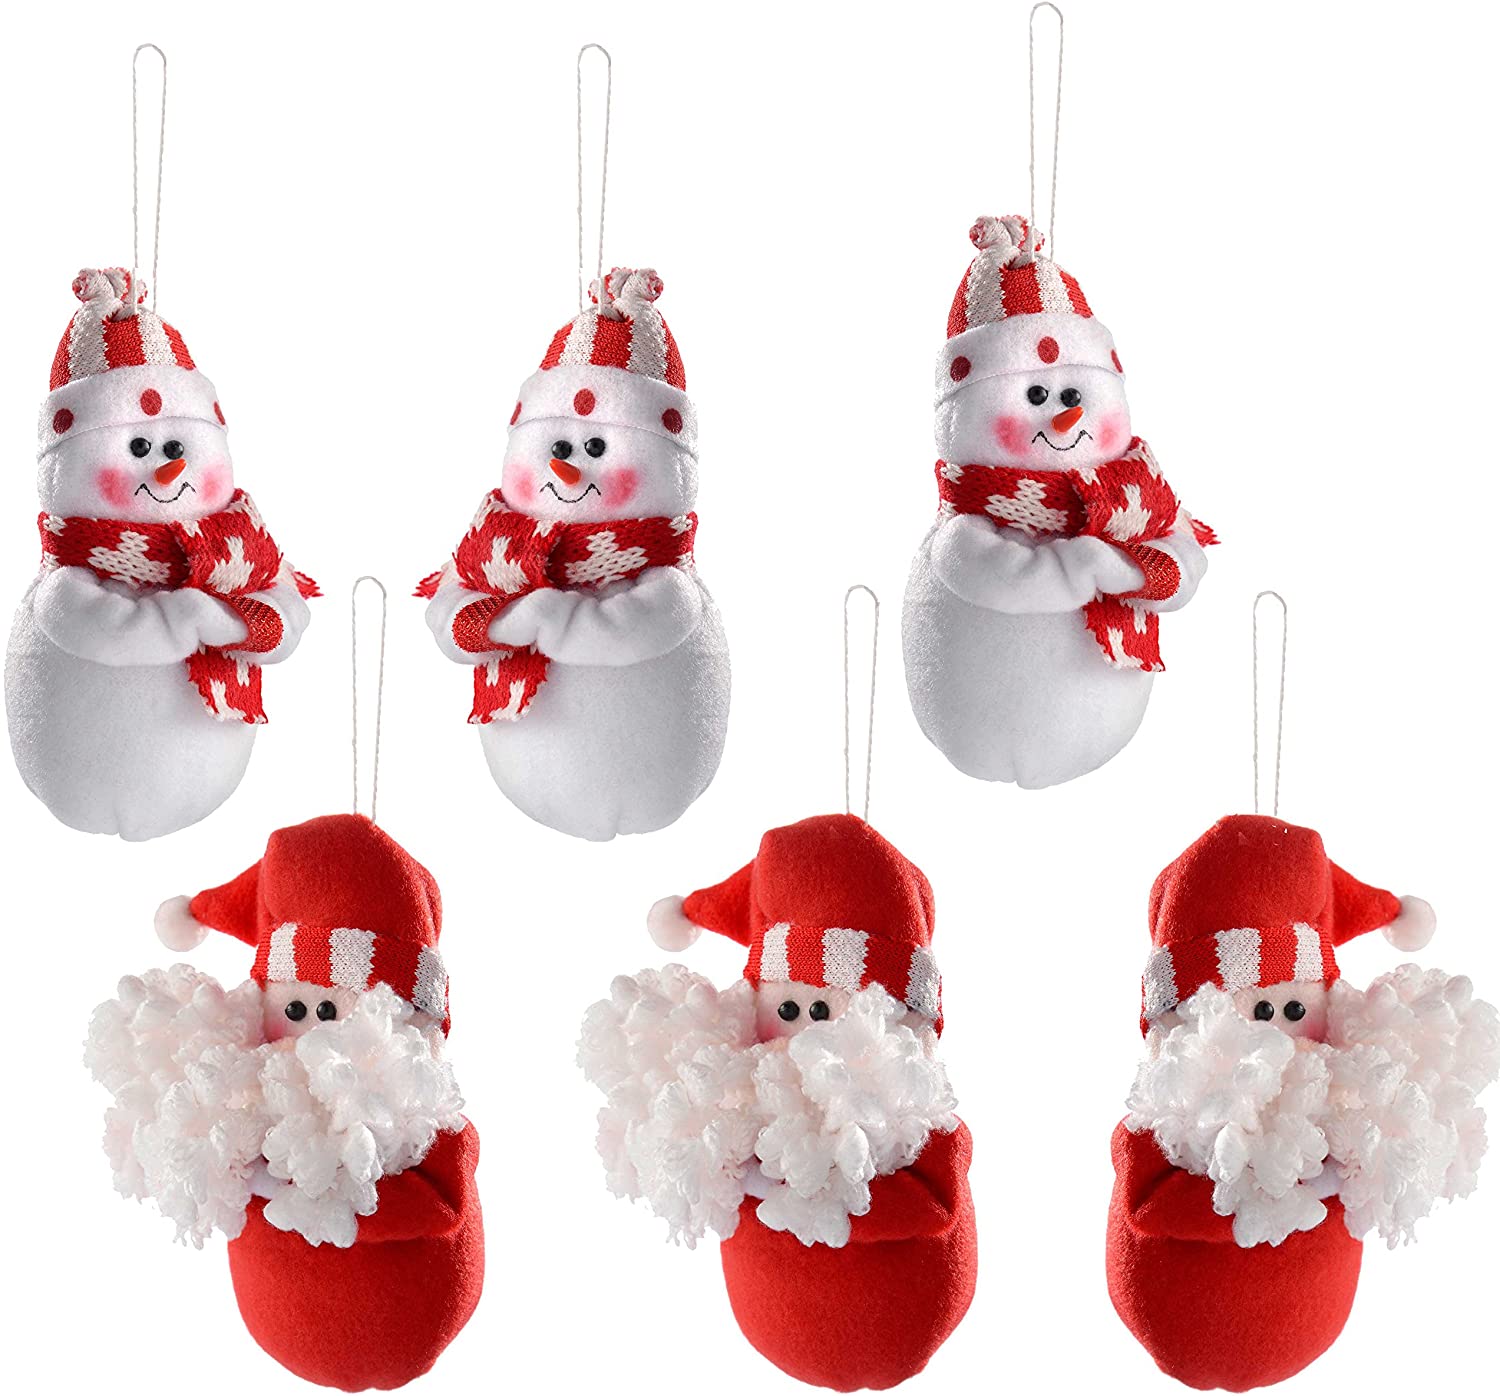 WeRChristmas Christmas Hanging Ornaments, 10 cm, Red/White, Set of 6